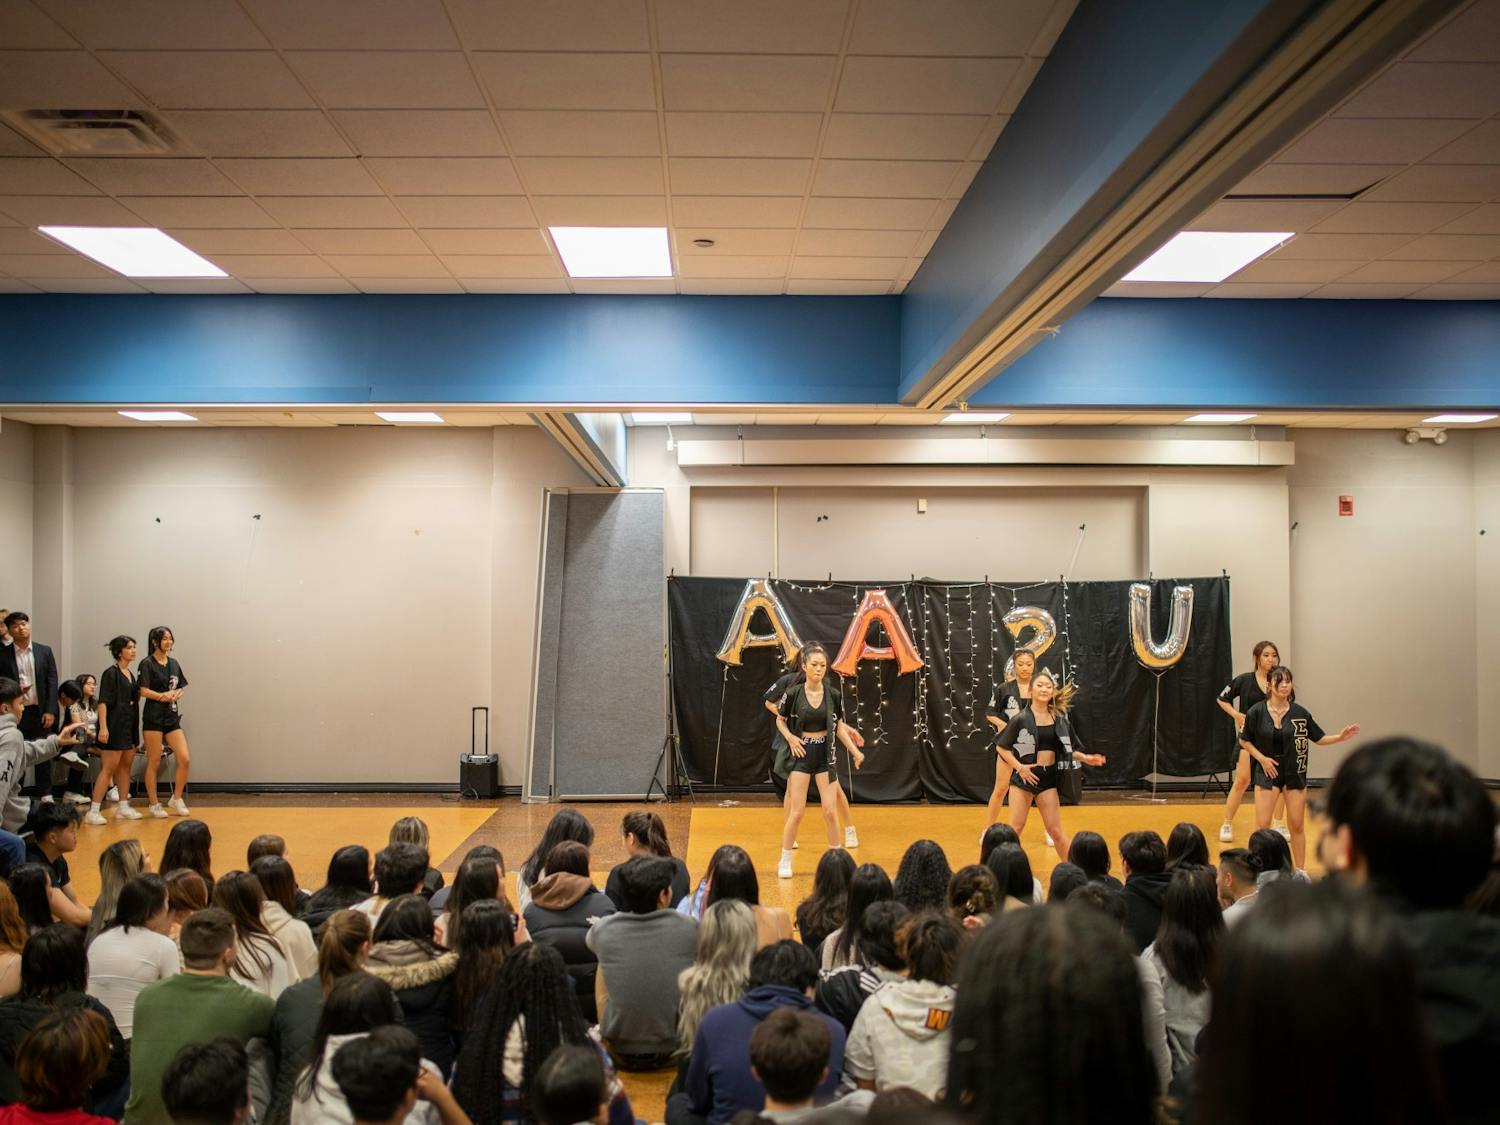 Over 300 students attended Asian American Student Union’s Night Market on Saturday night.